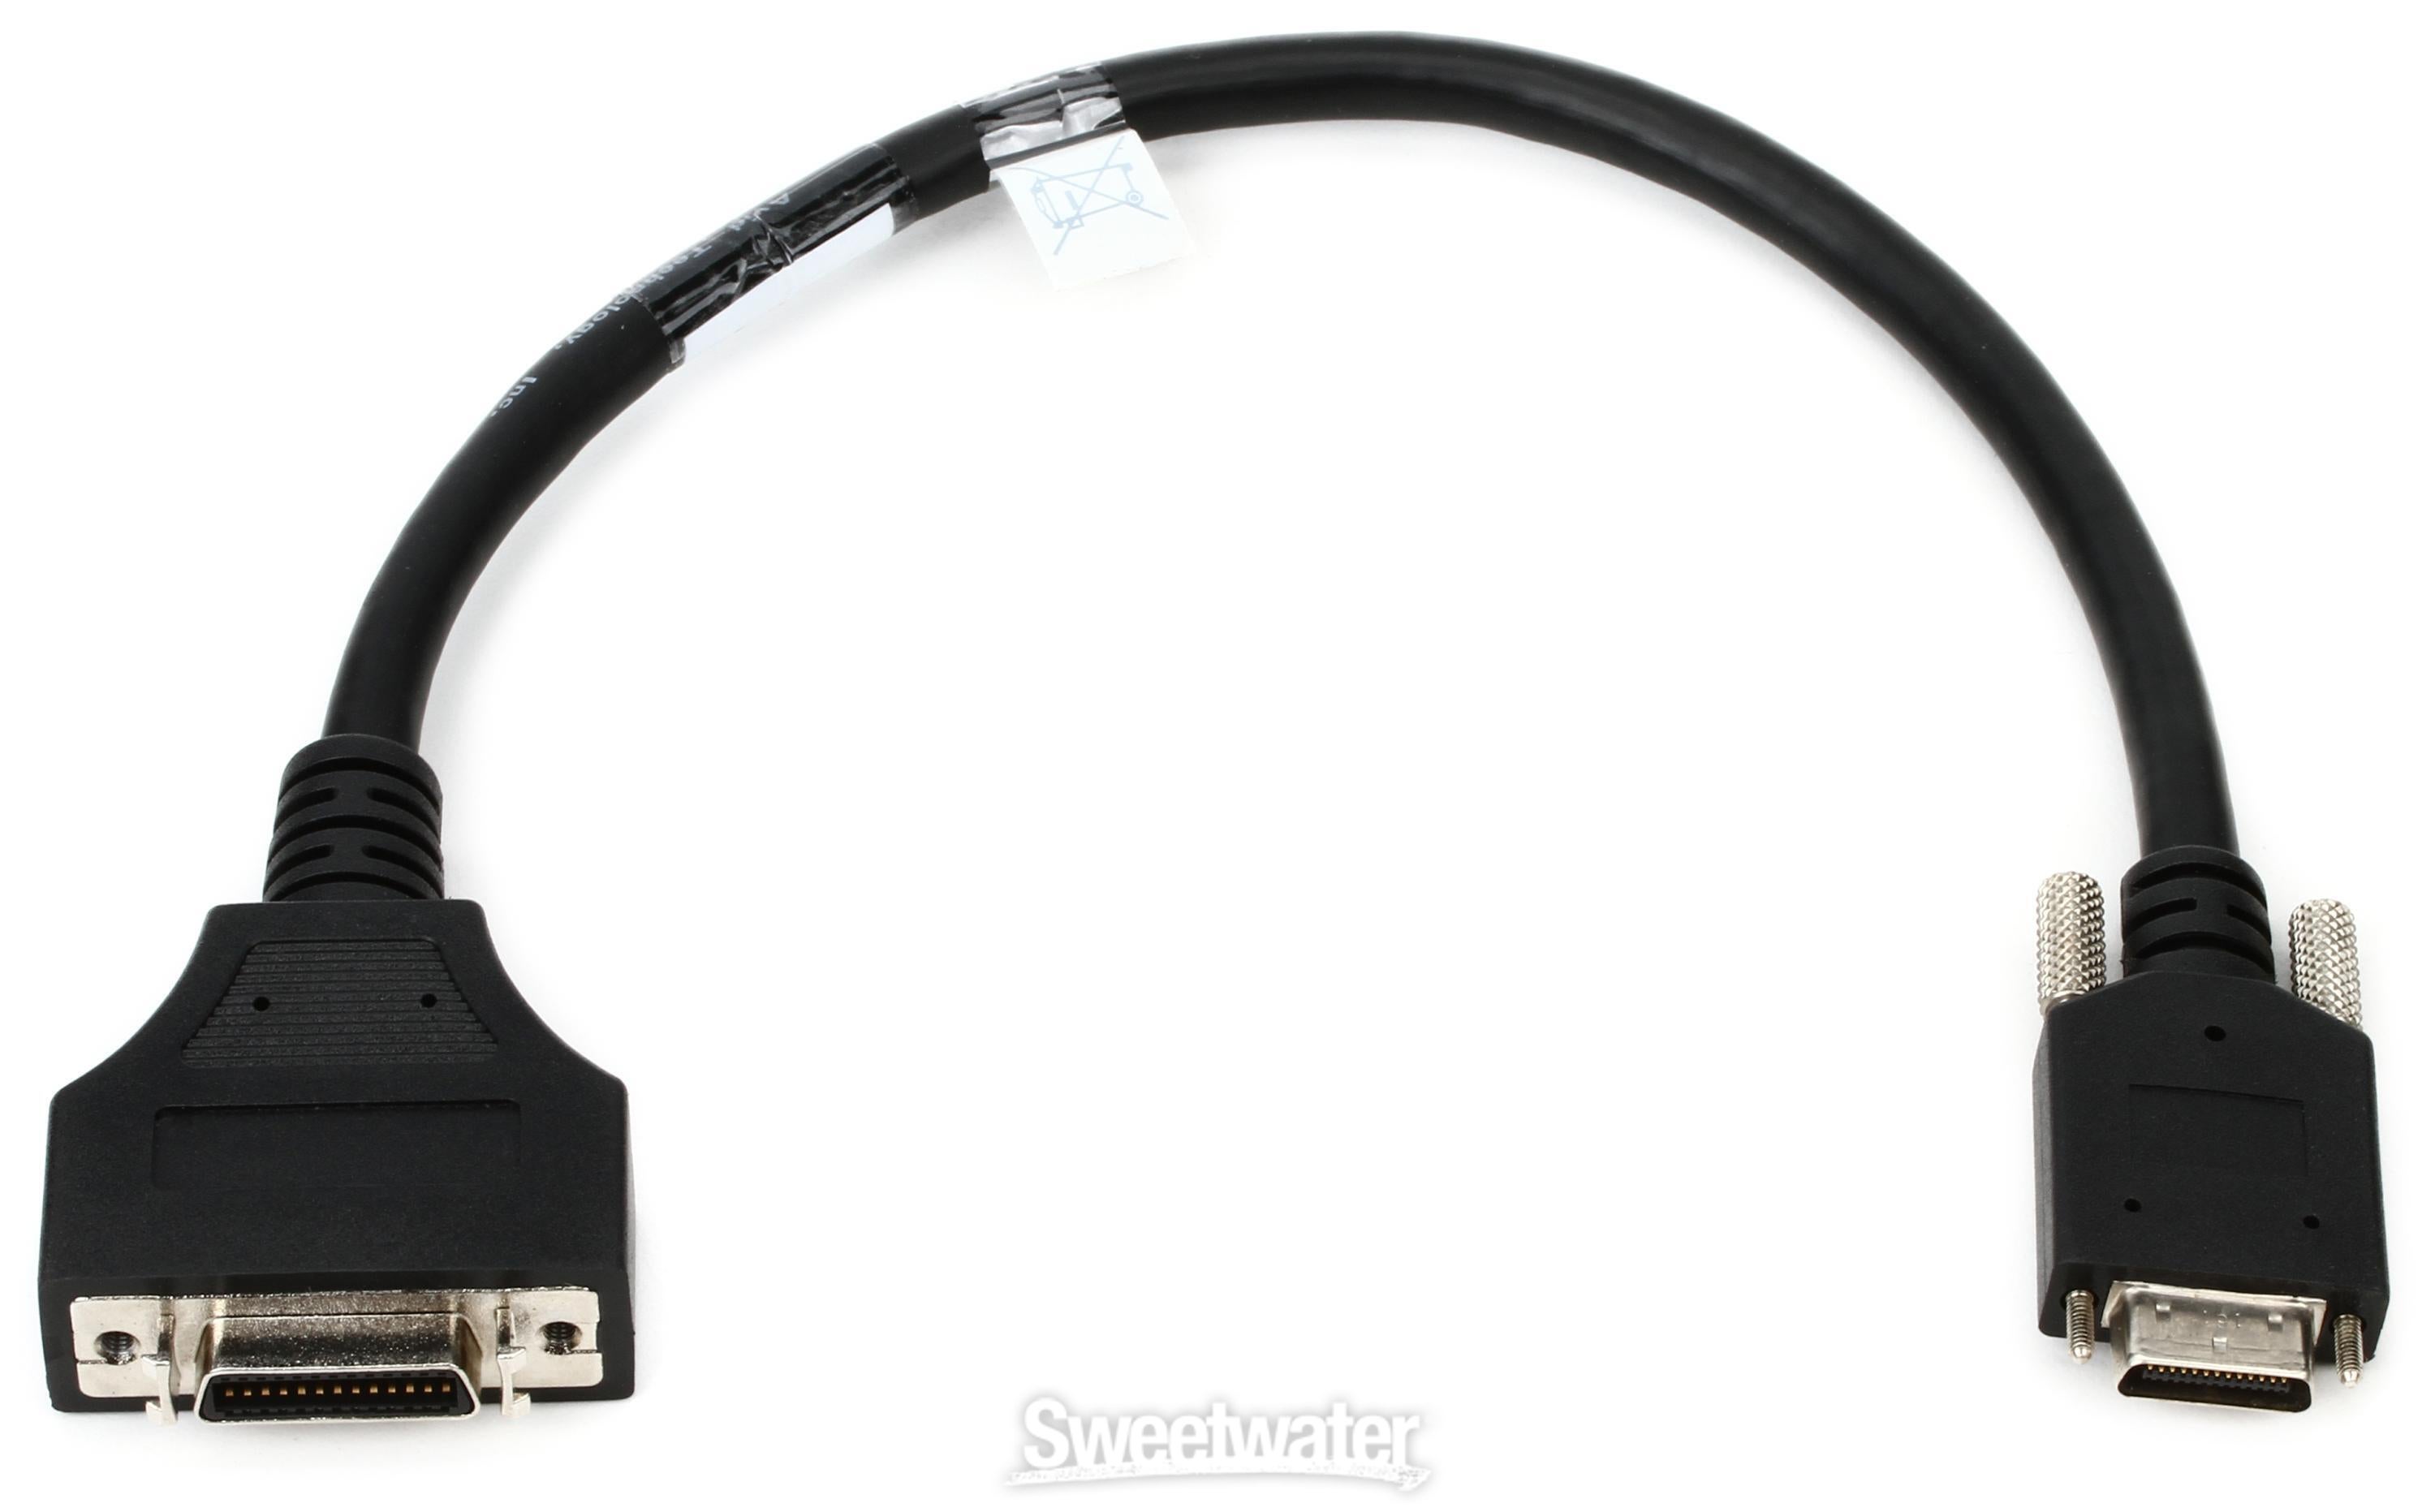 Avid DigiLink Female to DigiLink Mini Male Adapter Cable | Sweetwater